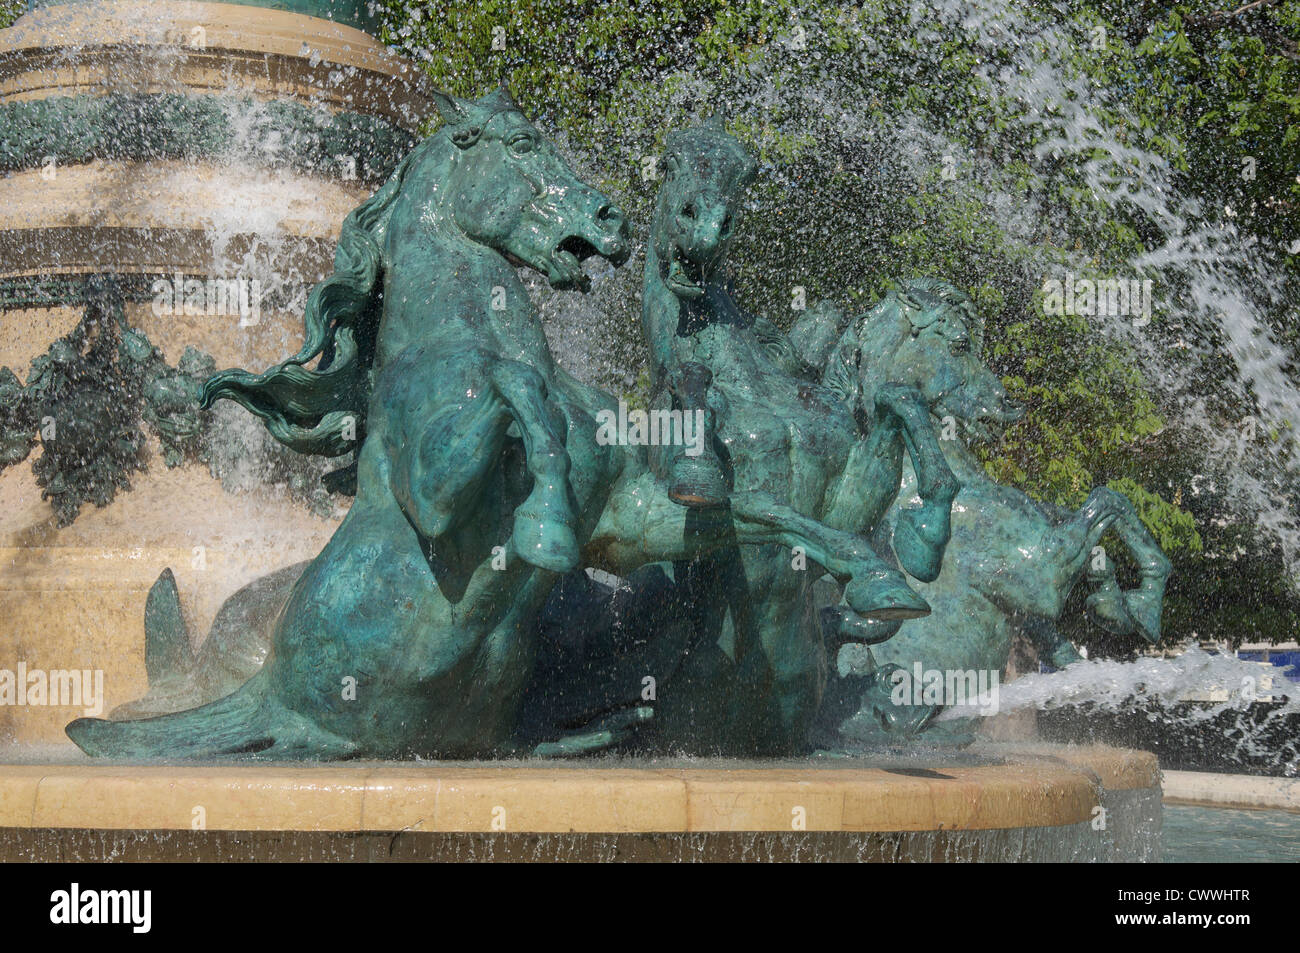 Fountains. Galloping horses charge through the water jets of the monumental Fontaine de l’Observatoire in the Jardin Marco Polo. Paris, France. Stock Photo